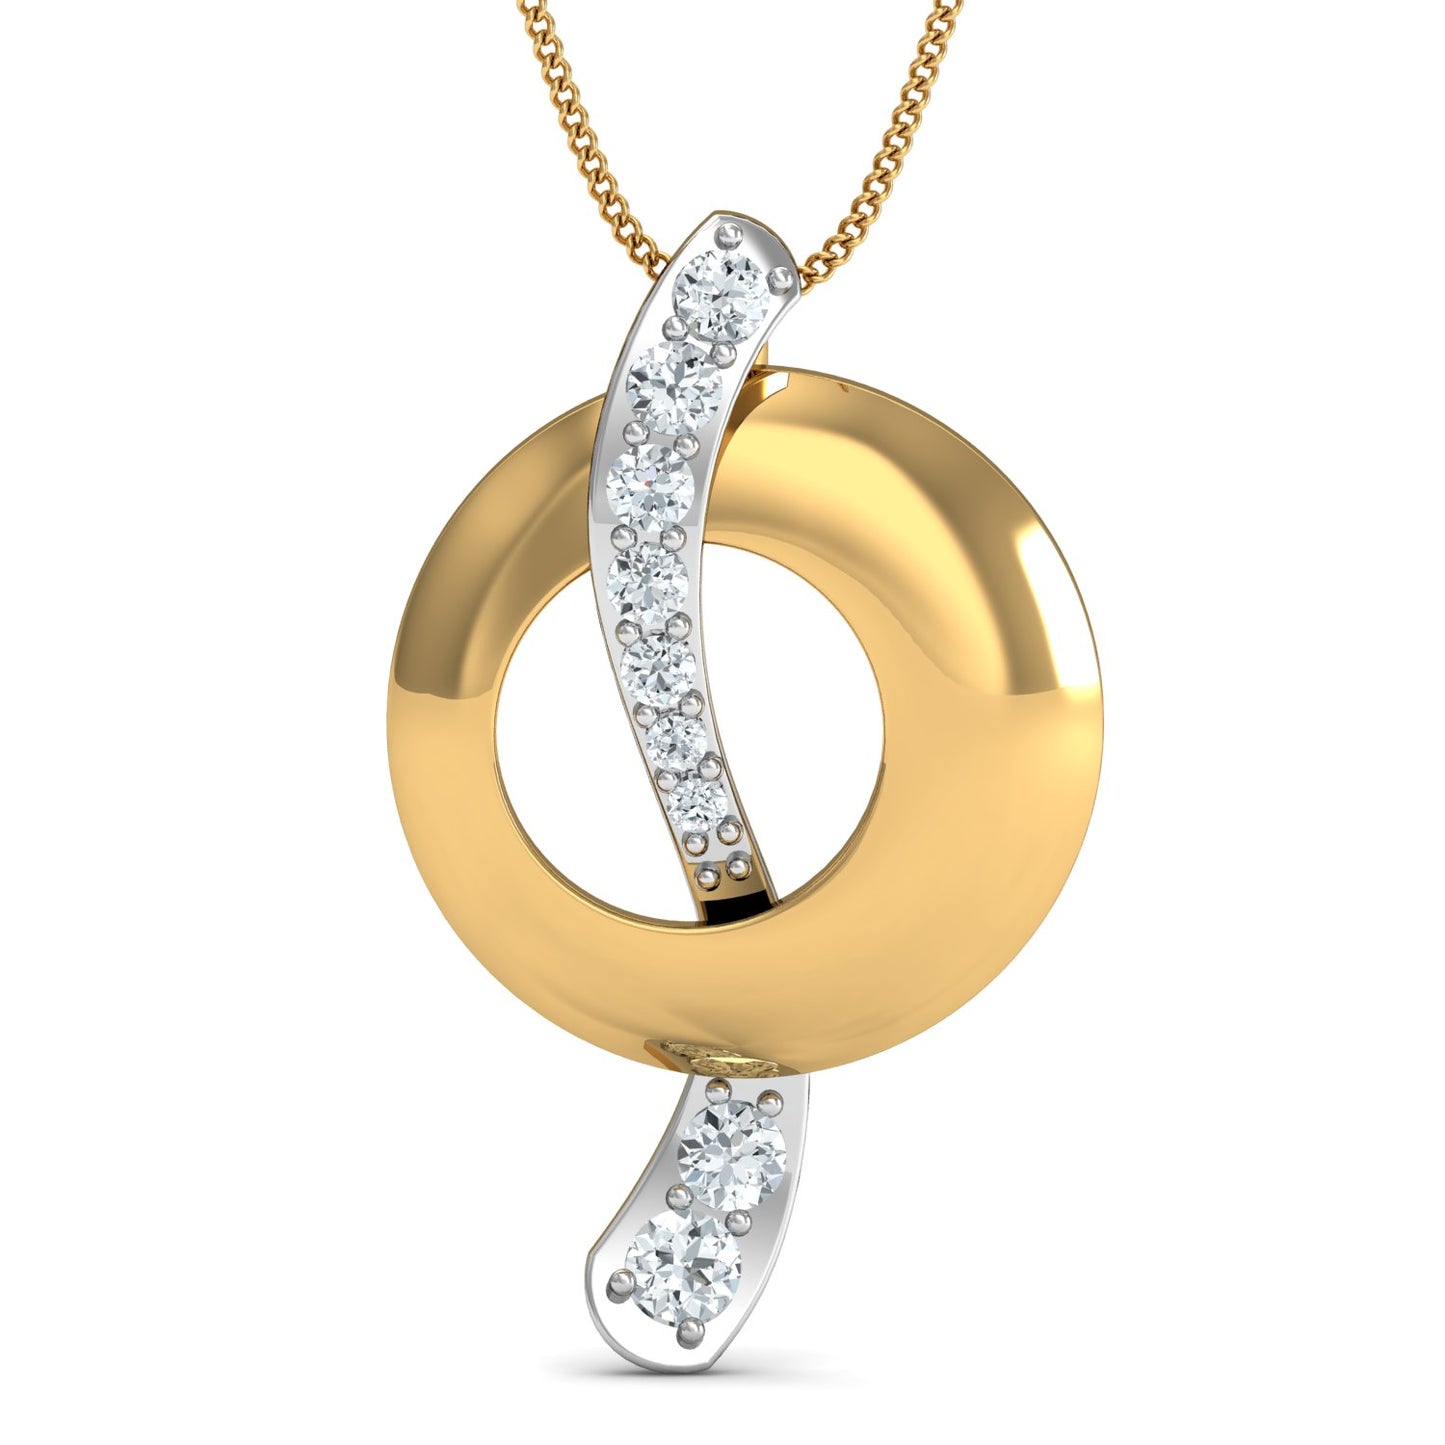 Diva circle pendant (Gold Plated 925 Sterling Silver)